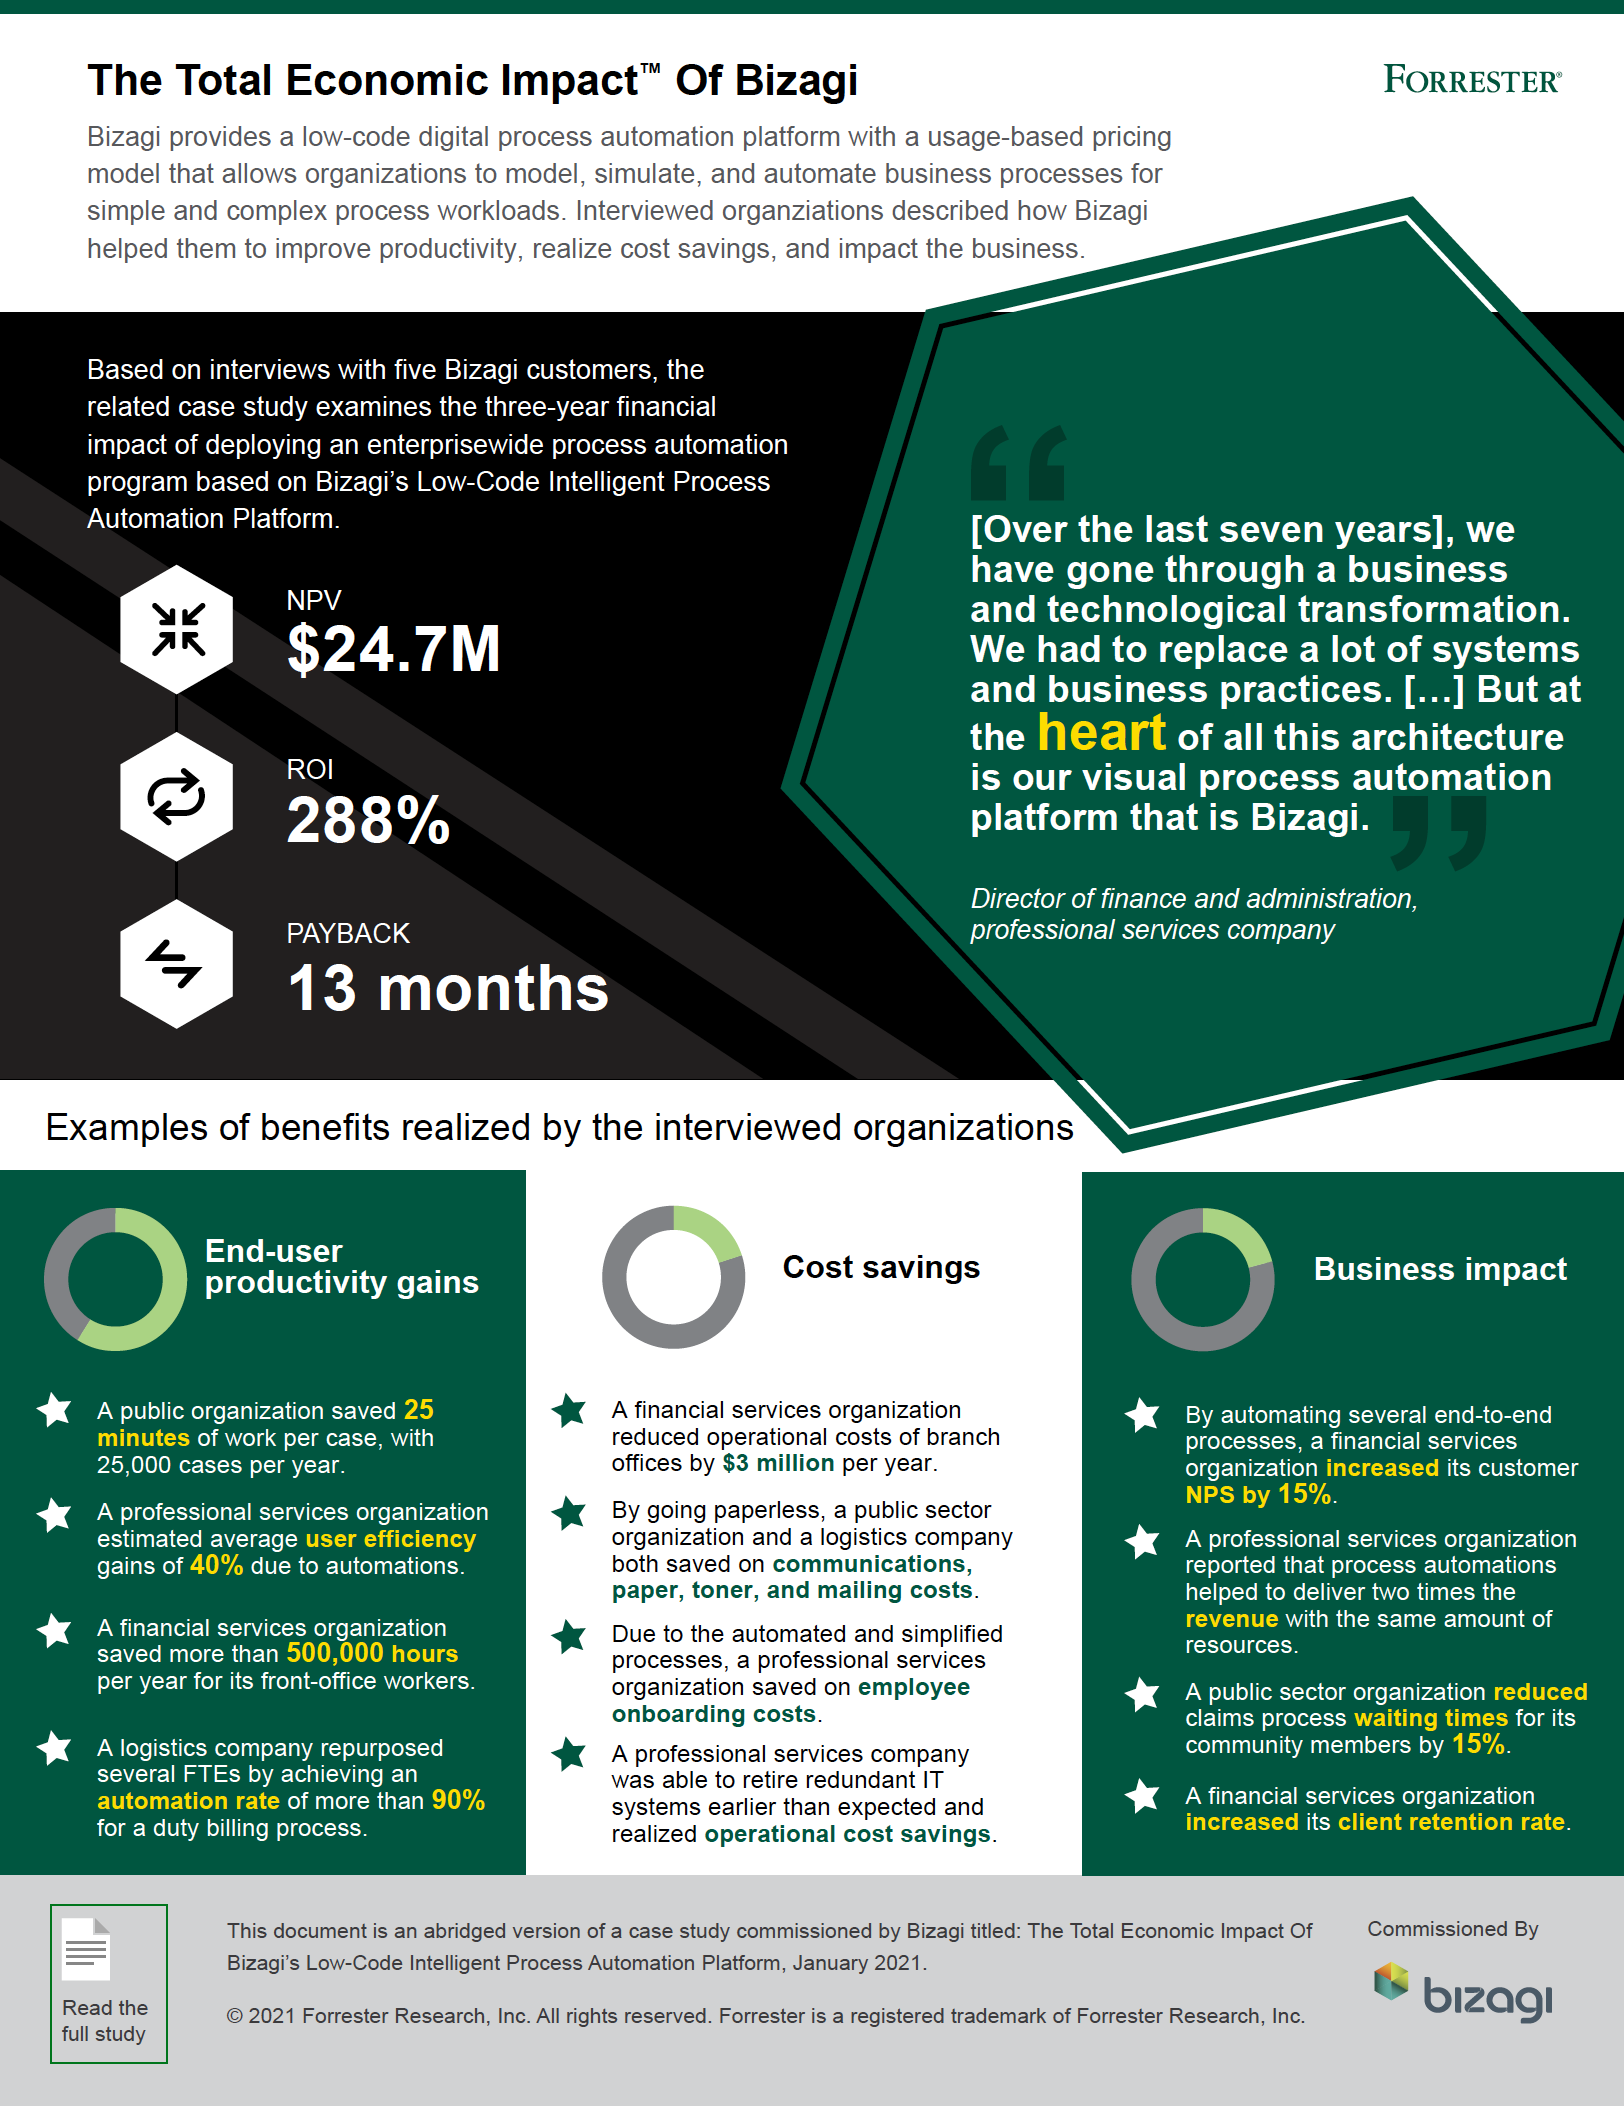 Forrester-TEI-Total-Economic-Impact-Infographic-Bizagi.png